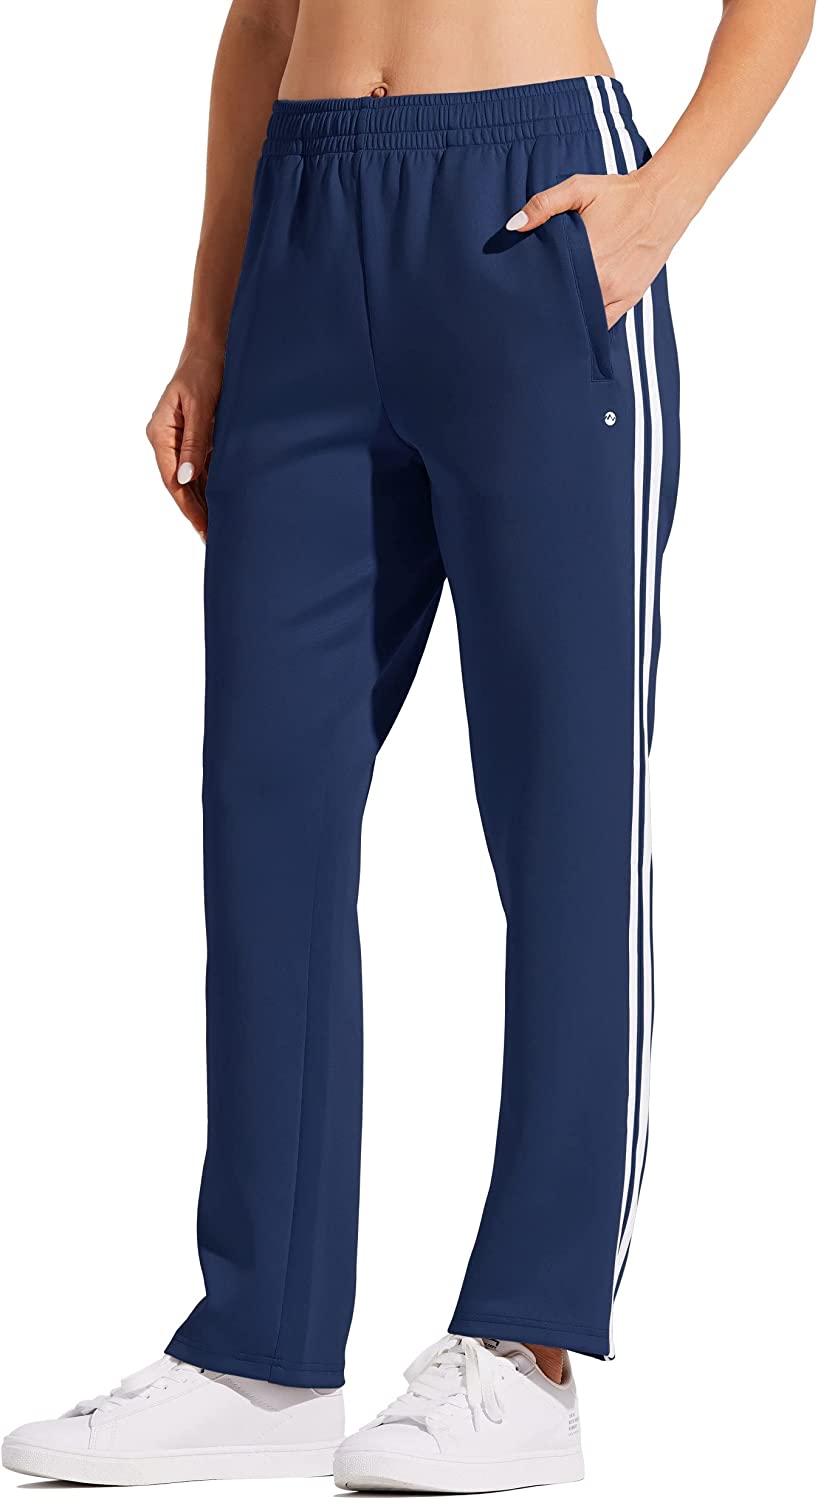 DIDA Black M 38 Size Narrow Fit 100% Polyester Fabric Men's Sports Track  Pant : Amazon.in: Clothing & Accessories